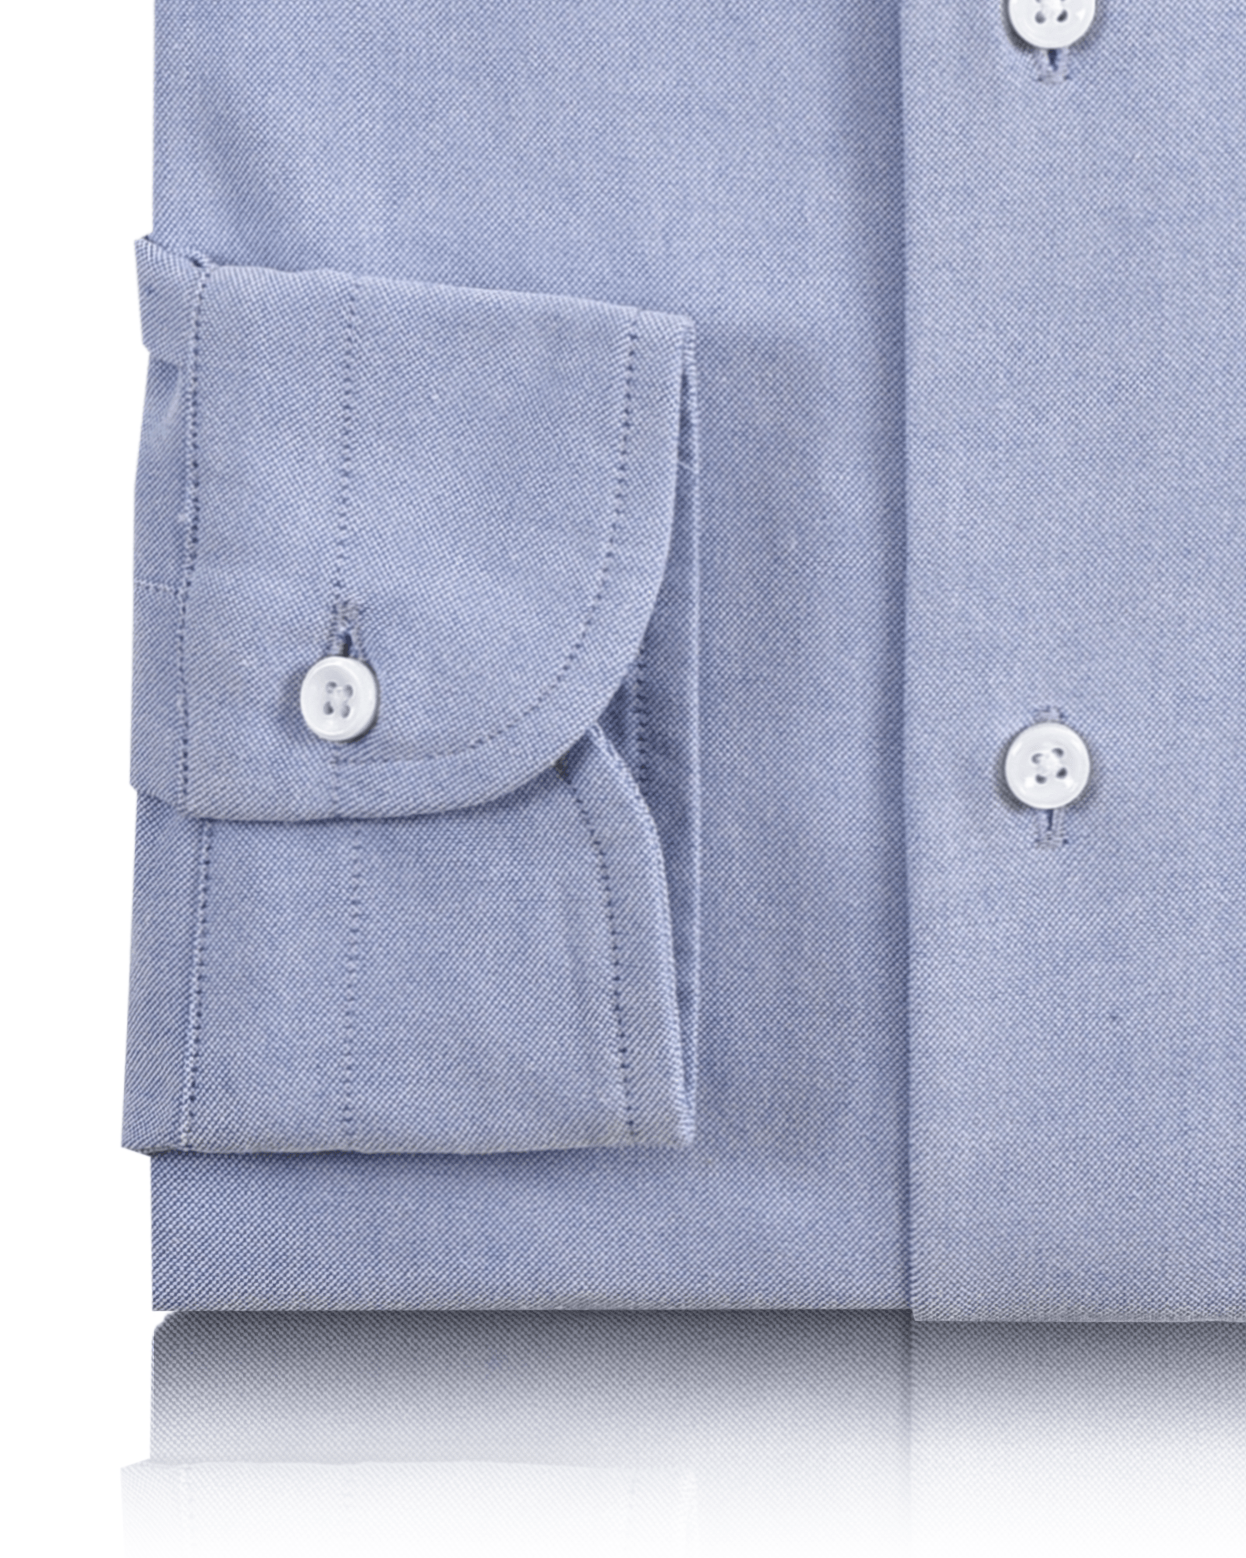 Cuff of the custom oxford shirt for men by Luxire in warzone blue